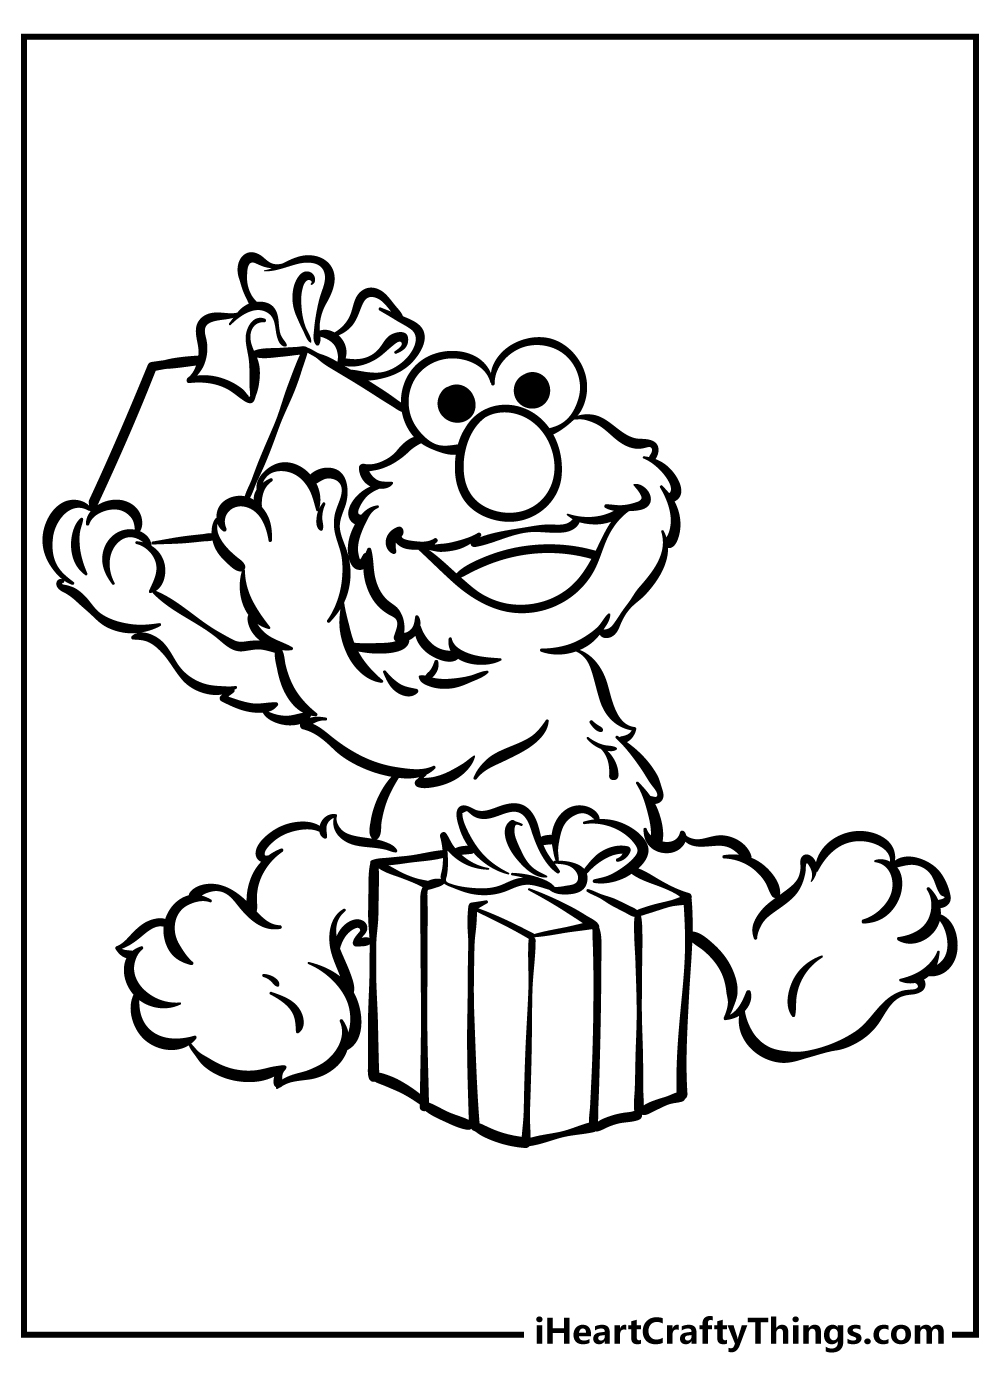 Sesame Street Coloring Pages free pdf download